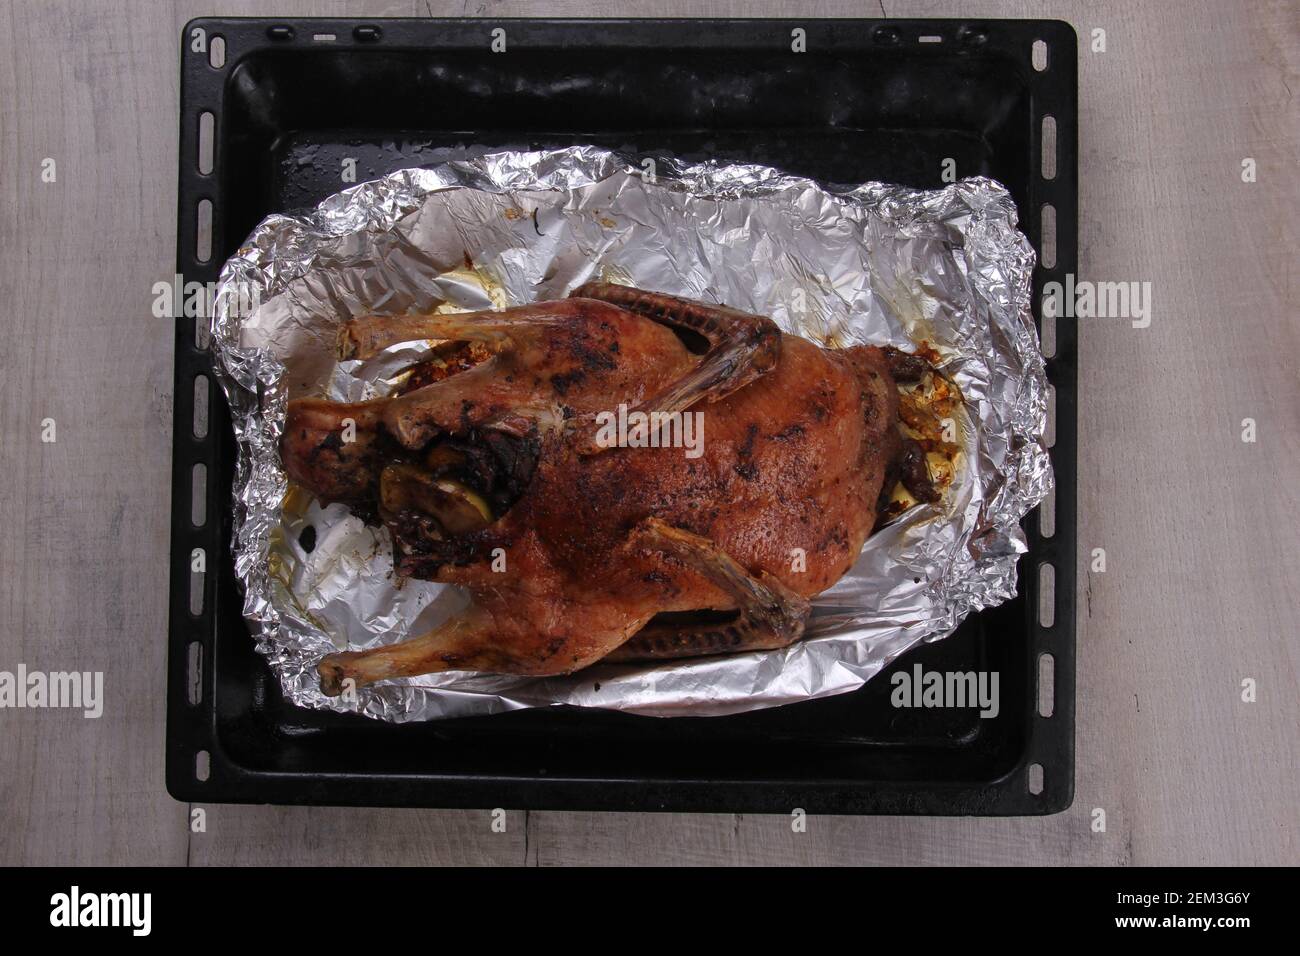 Roast Christmas duck stuffed with fruits on oven plate and aluminium foil Stock Photo